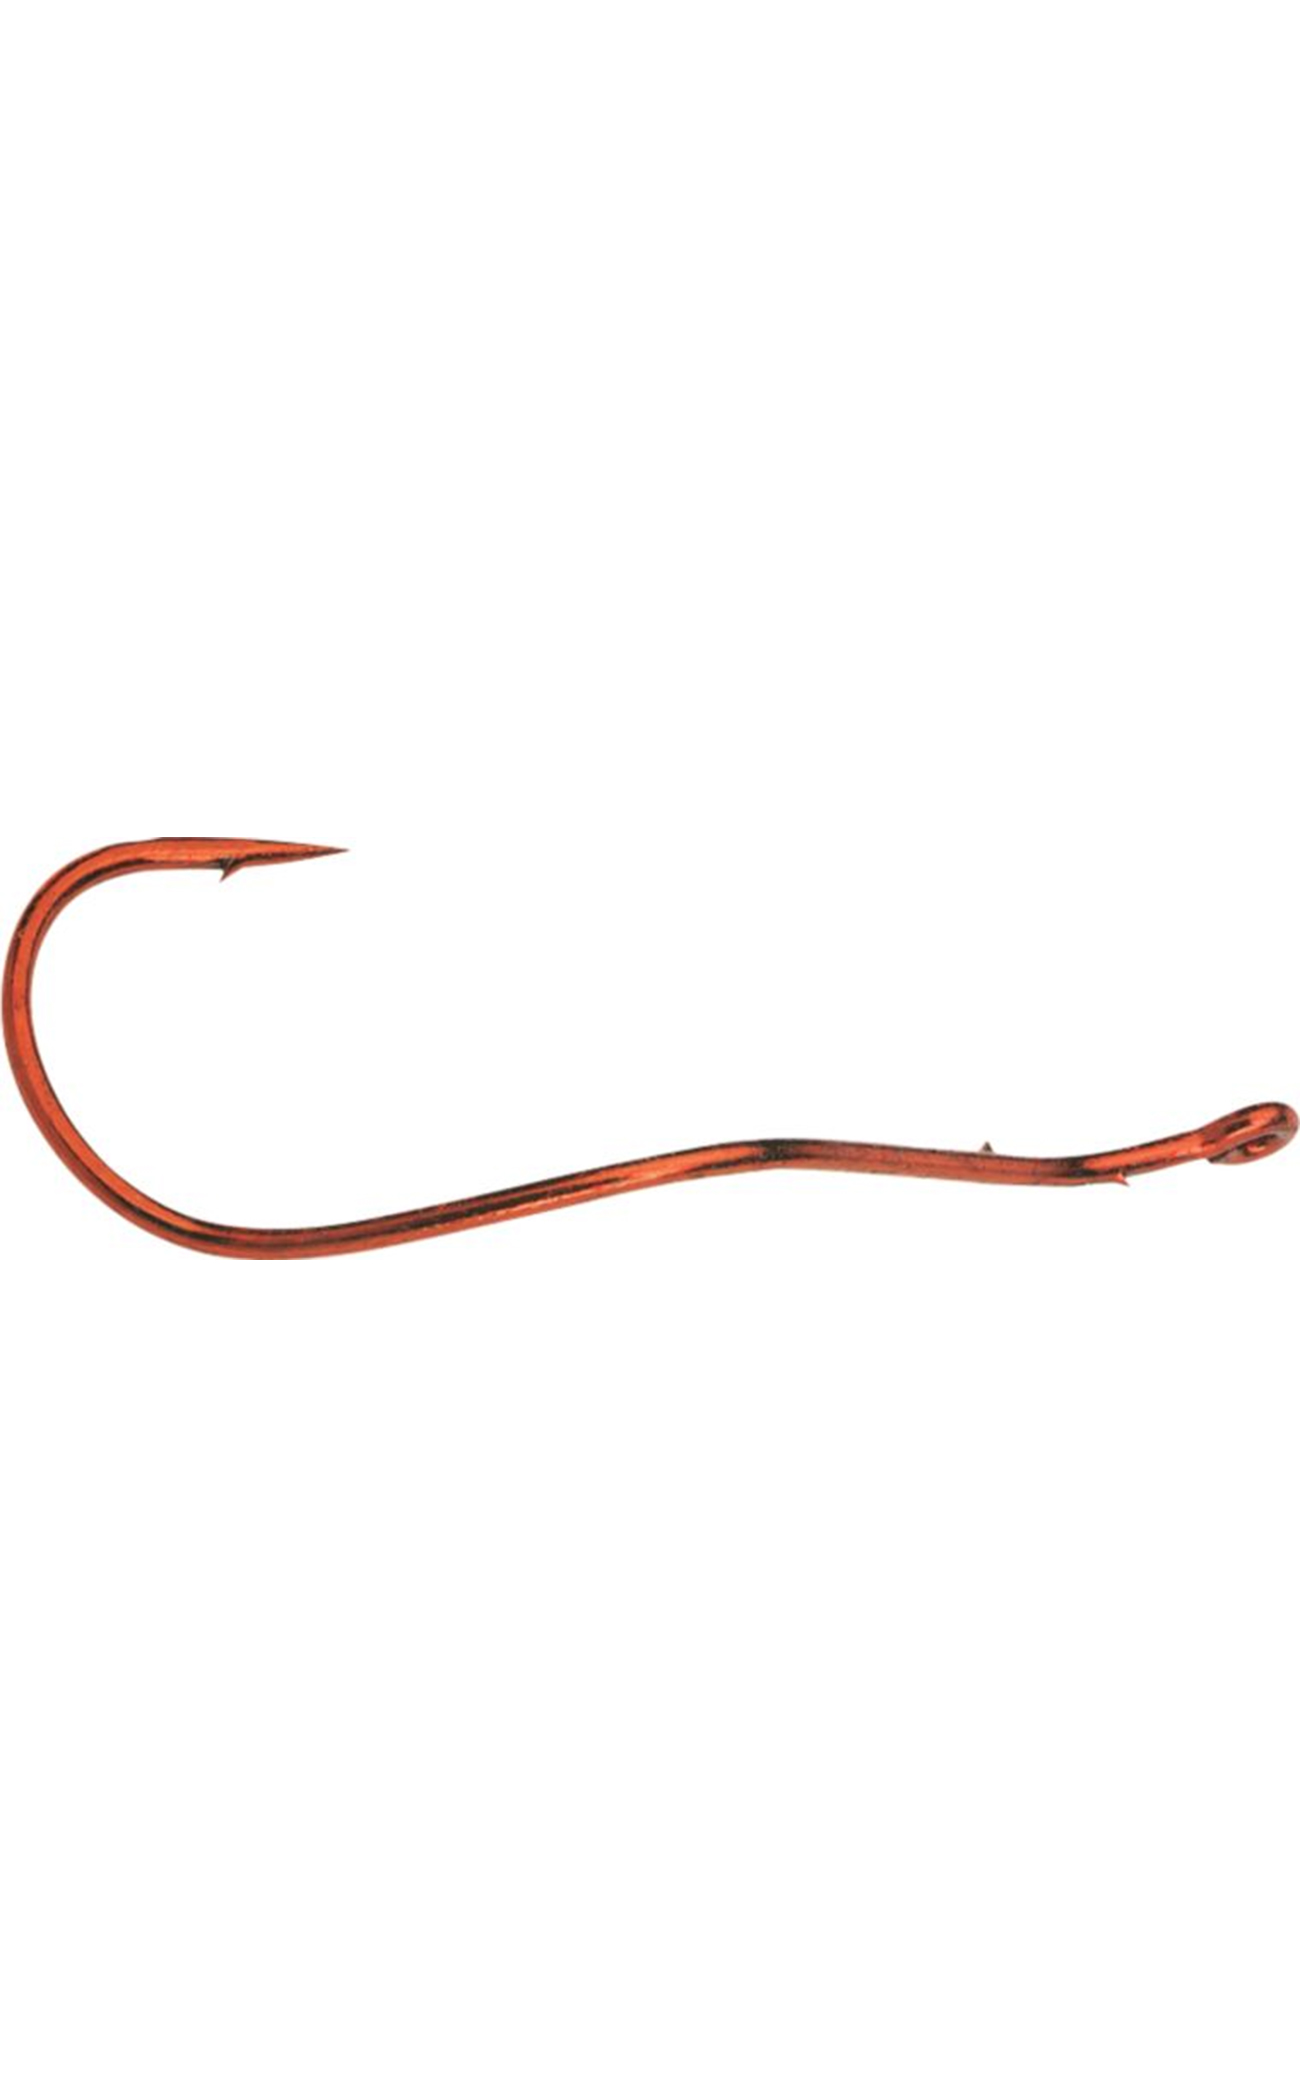 Innovative Weedless Barbed Hook for Bass Fishing Worm Bait Holder